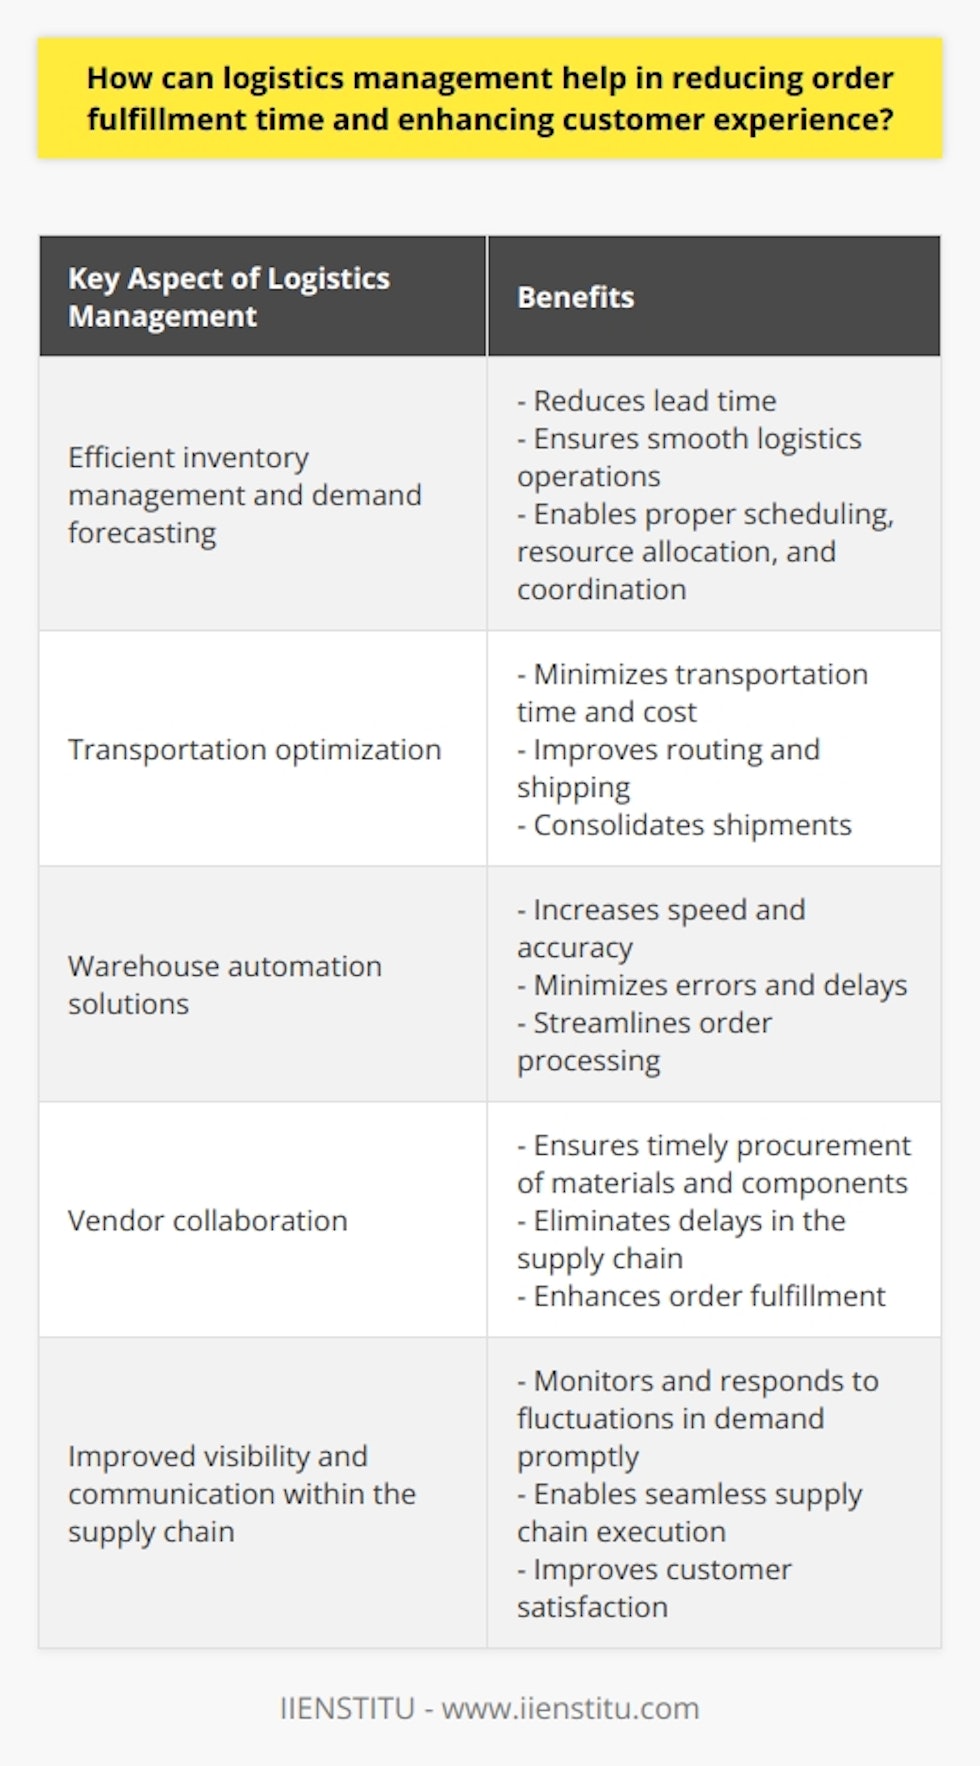 Logistics management plays a vital role in reducing order fulfillment time and enhancing customer experience. By implementing effective strategies and utilizing advanced technologies, companies can achieve quicker product delivery and increased efficiency.Efficient inventory management and demand forecasting are essential in reducing order fulfillment time. By maintaining appropriate stock levels and minimizing stockouts, organizations can reduce lead time and ensure smooth logistics operations. Accurate demand forecasting enables proper scheduling, resource allocation, and coordination among various supply chain components, resulting in faster order fulfillment.Transportation optimization is another key aspect of logistics management to reduce order fulfillment time. Strategies such as improved routing, expedited shipping, and consolidation of shipments help minimize transportation time and cost. Timely and accurate order delivery is crucial for a positive customer experience.Integrating warehouse automation solutions can significantly improve the speed and accuracy of order processing. Robotics and automated storage and retrieval systems (AS/RS) increase efficiency, minimize errors, and reduce delays in order fulfillment. These technologies streamline the entire process, resulting in improved customer experience.Building strong relationships and collaboration with vendors, partners, and retailers is vital for reducing order fulfillment time. Close collaboration ensures timely procurement of raw materials and components, eliminating delays in the supply chain. Seamless integration and collaboration lead to faster order fulfillment and enhanced customer satisfaction.Improved visibility and communication within the supply chain are crucial in reducing order fulfillment time. The use of technologies such as the Internet of Things (IoT) and real-time data analytics allow companies to monitor and respond to fluctuations in demand promptly. This ensures seamless supply chain execution and improved customer satisfaction.In conclusion, effective logistics management, encompassing inventory management, demand forecasting, transportation optimization, warehouse automation, vendor collaboration, and improved visibility, is essential for reducing order fulfillment time. By focusing on these areas, companies can achieve a competitive advantage, improve customer satisfaction, and drive growth.